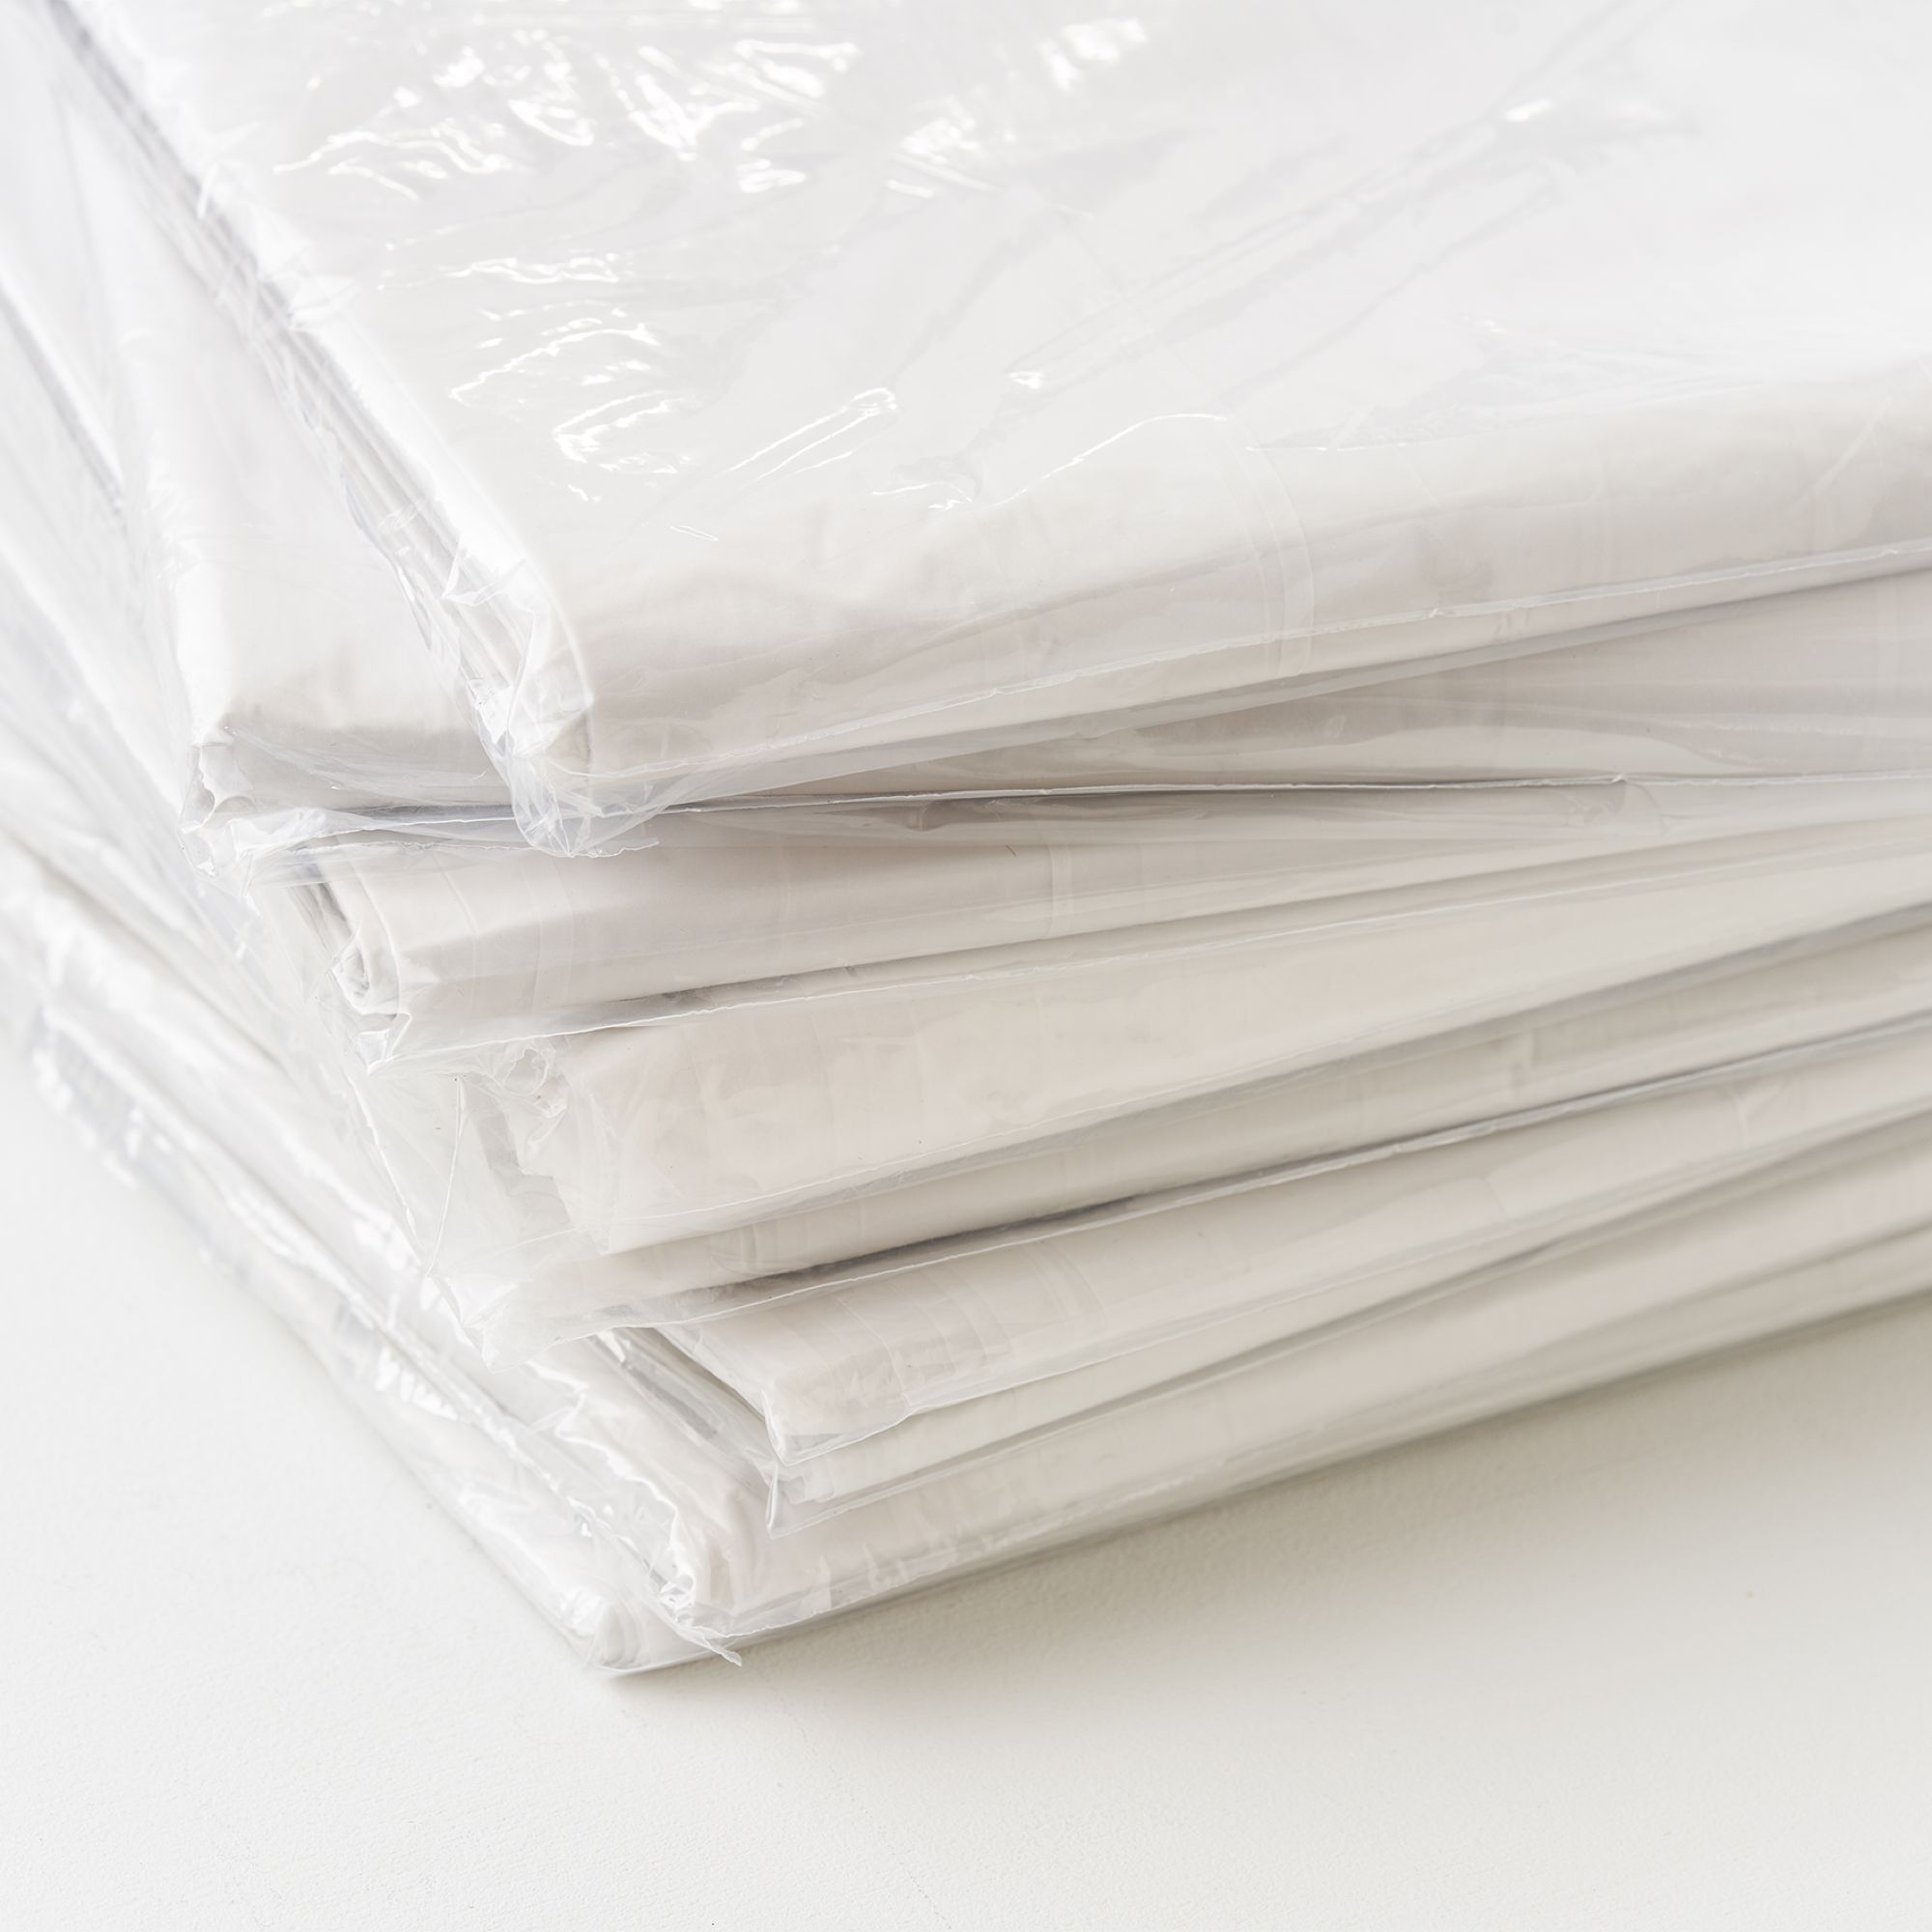 Large 100% Recycled Reusable Plastic Dust sheet, Pack of 10